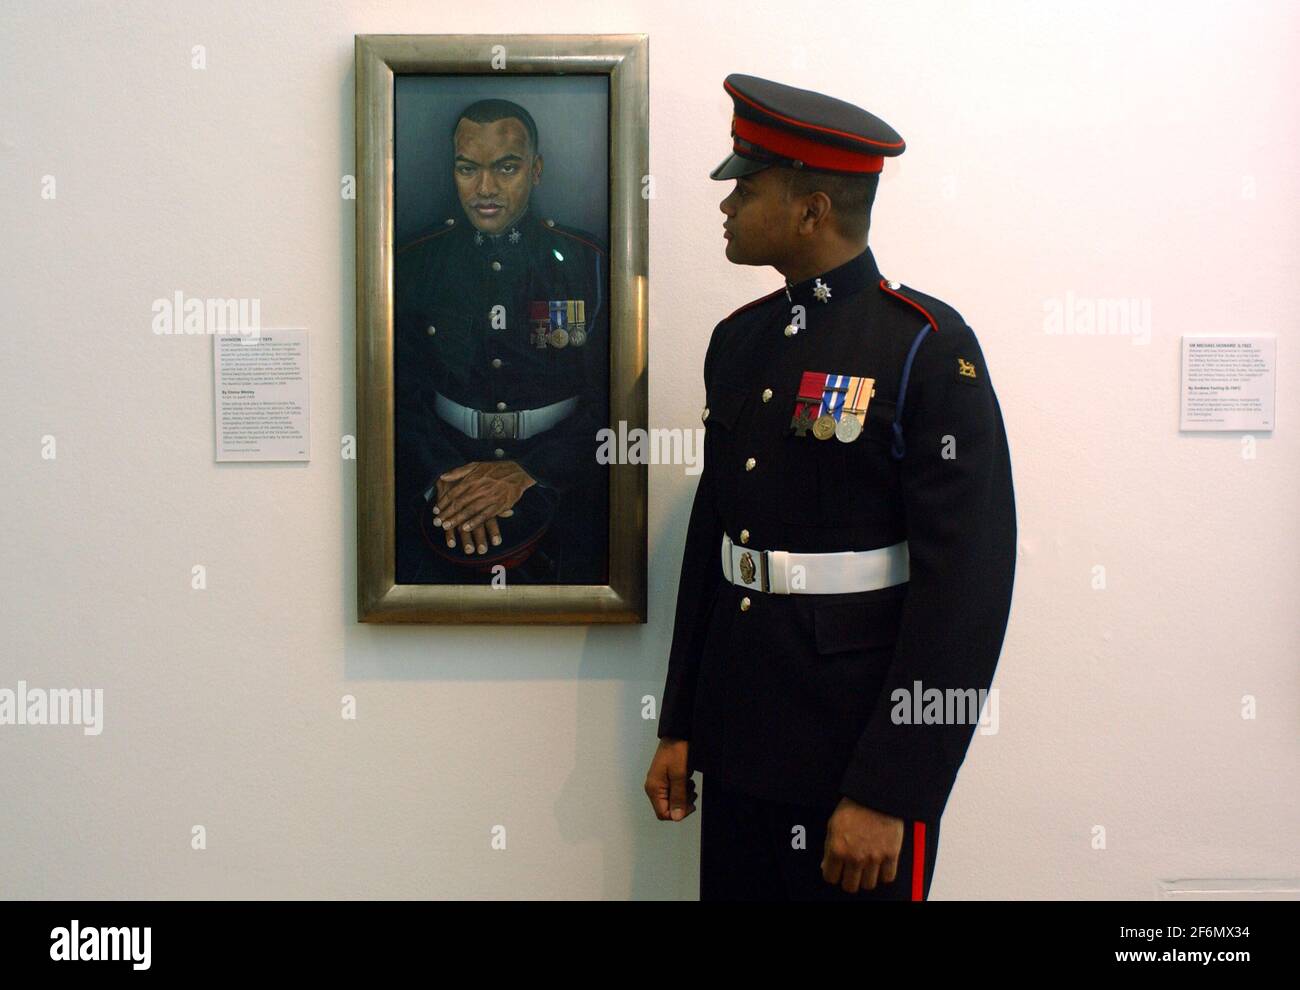 LANCE CORPORAL JOHNSON BEHARRY VC, STANDS BESIDE HIS PORTRAIT IN THE NATIONAL PORTRAIT GALLERY,LONDON.BHARRY WON THE VC FOR SAVING A NUMBER OF COMRADES,TWICE,UNDER INTENSE FIRE IN SOUTHERN IRAQ.THE PAINTING IS BY EMMA WESLEY. 21/2/07 ,TOM PILSTON Stock Photo